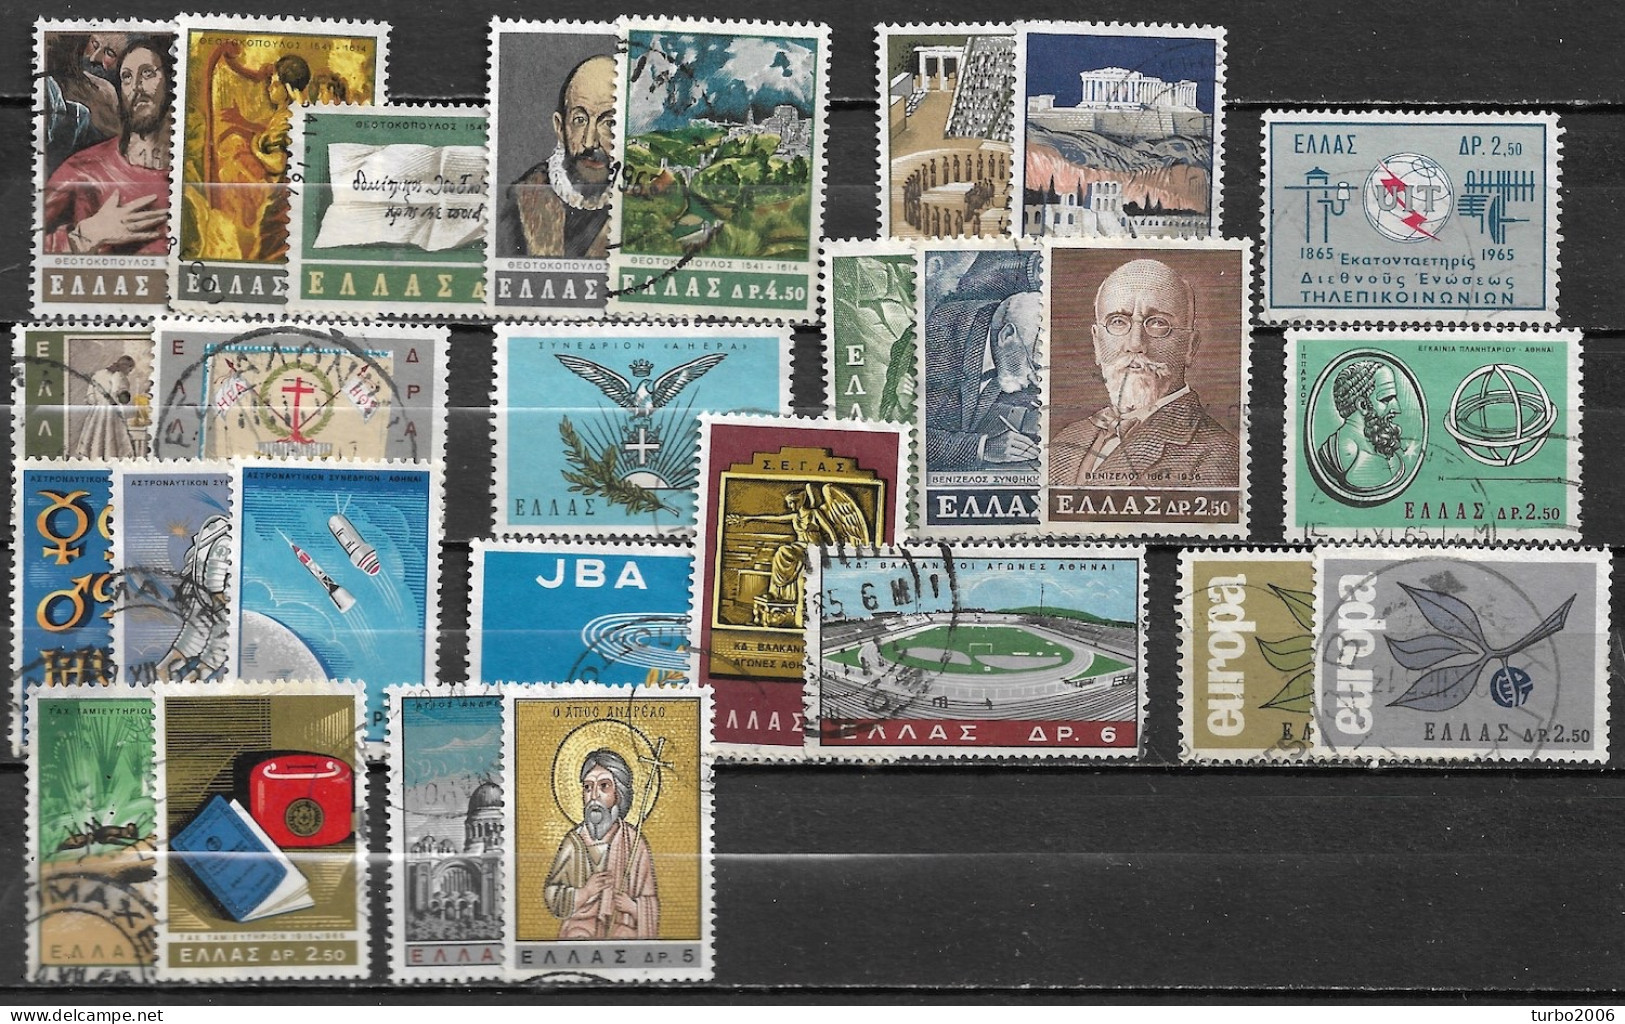 GREECE 1965 Complete All Sets Used Vl. 935 / 961 - Full Years